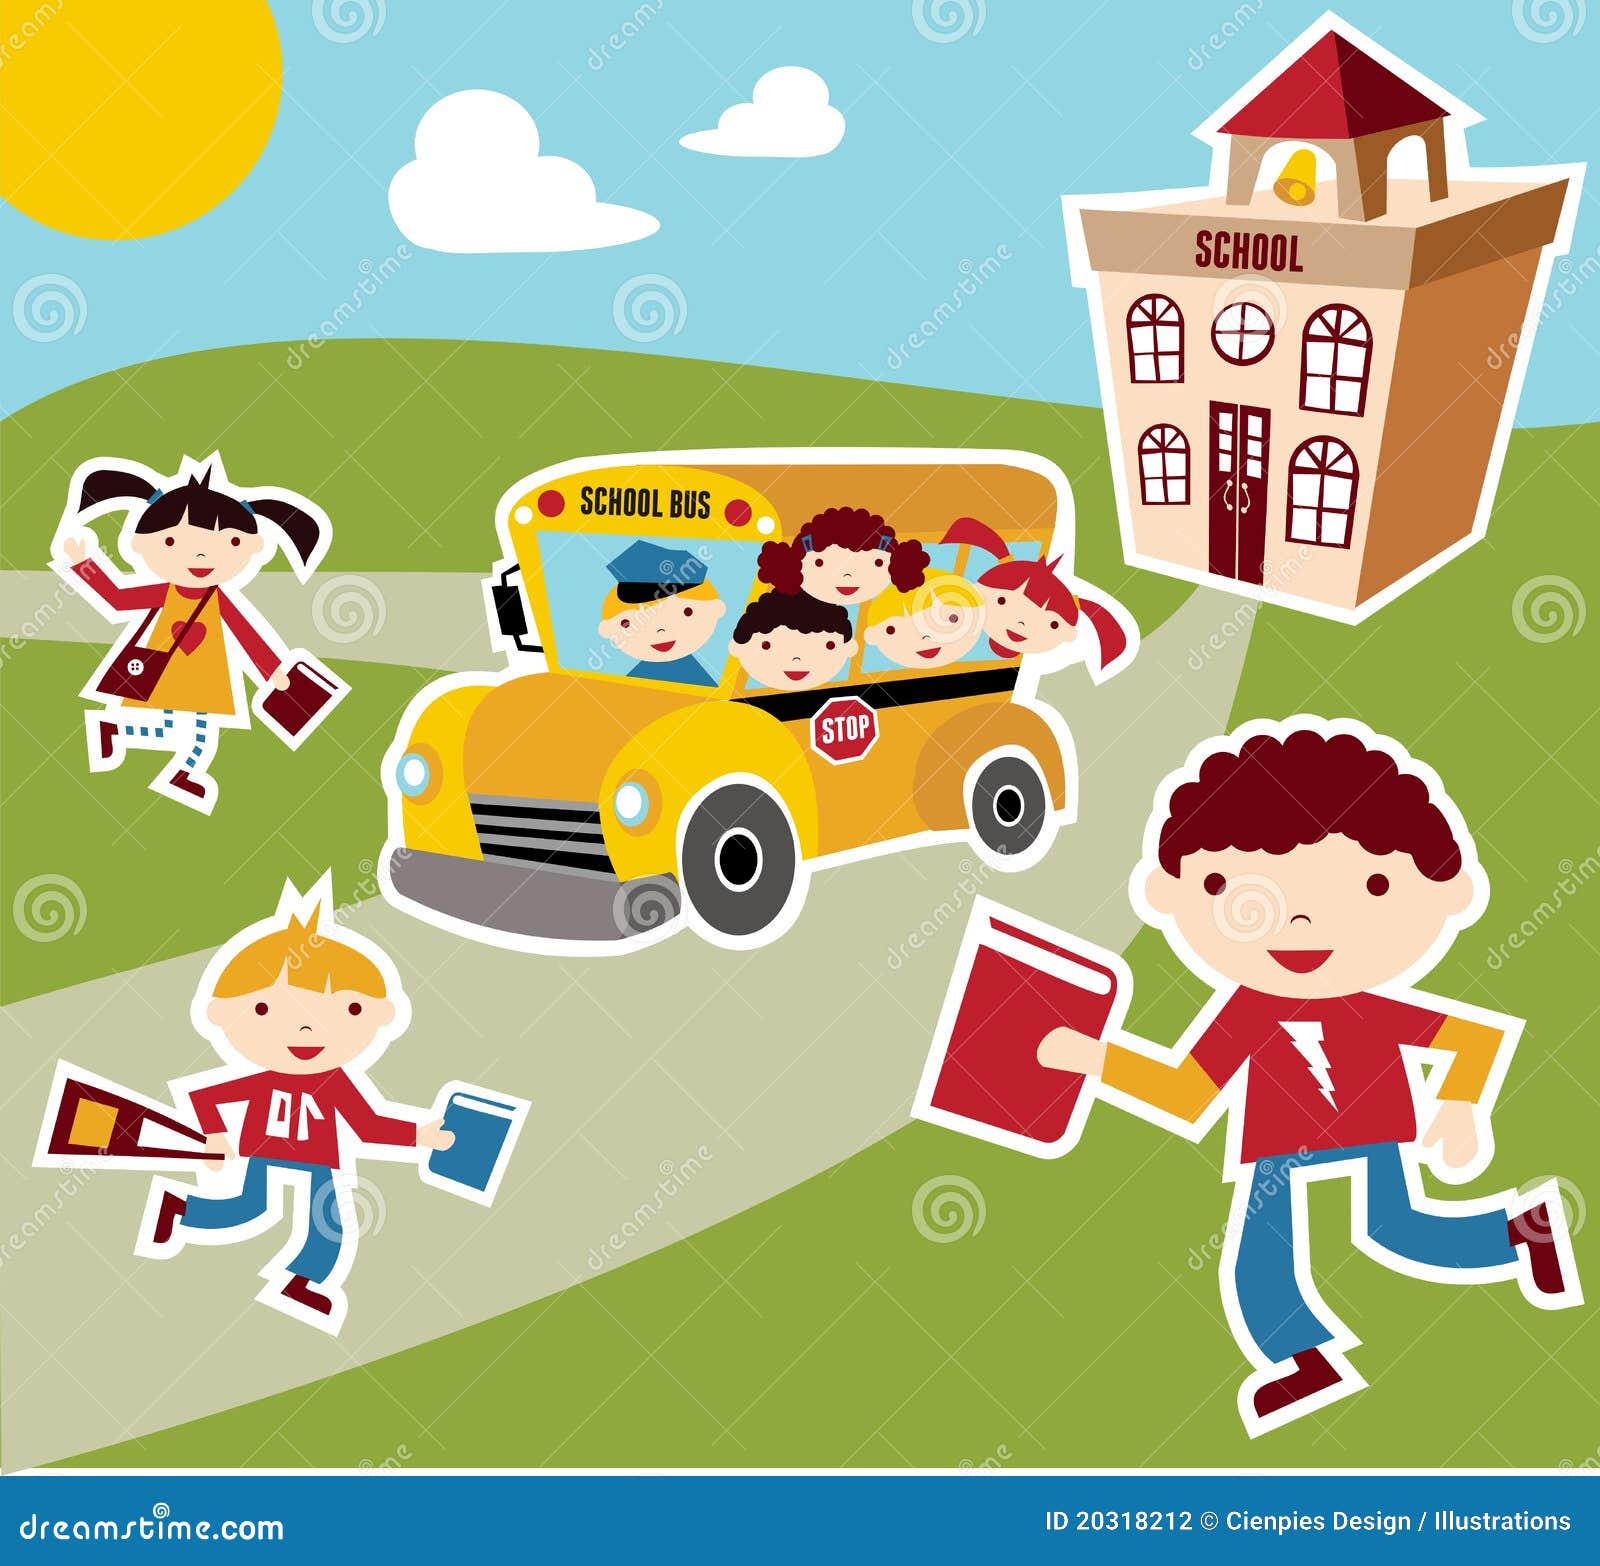 https://thumbs.dreamstime.com/z/back-to-school-concept-background-20318212.jpg